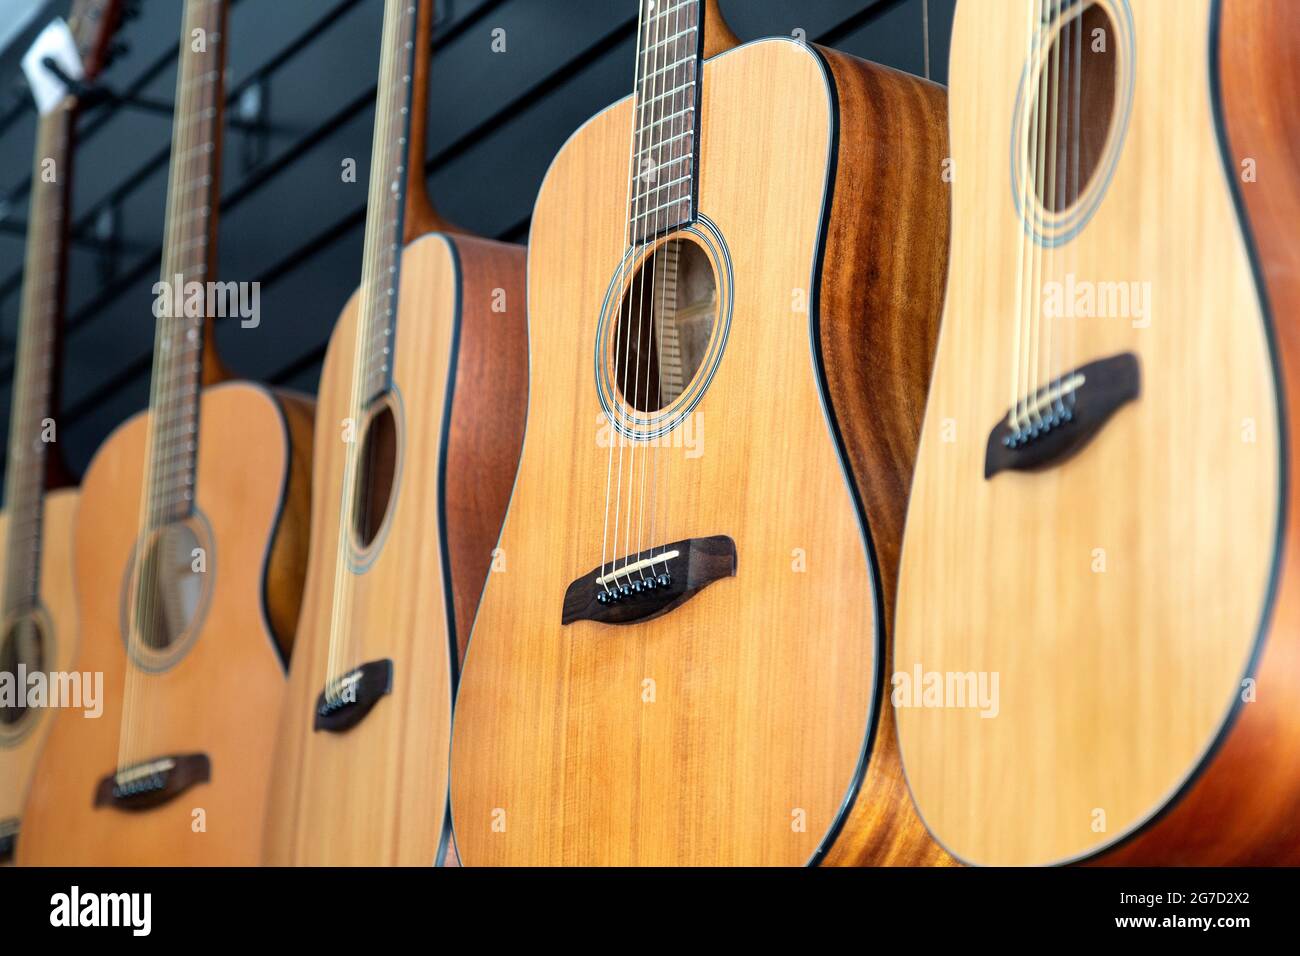 Guitars for sale at Music & Beans Coffee Shop and guitar shop on Green Lanes, Harringay, London, UK Stock Photo